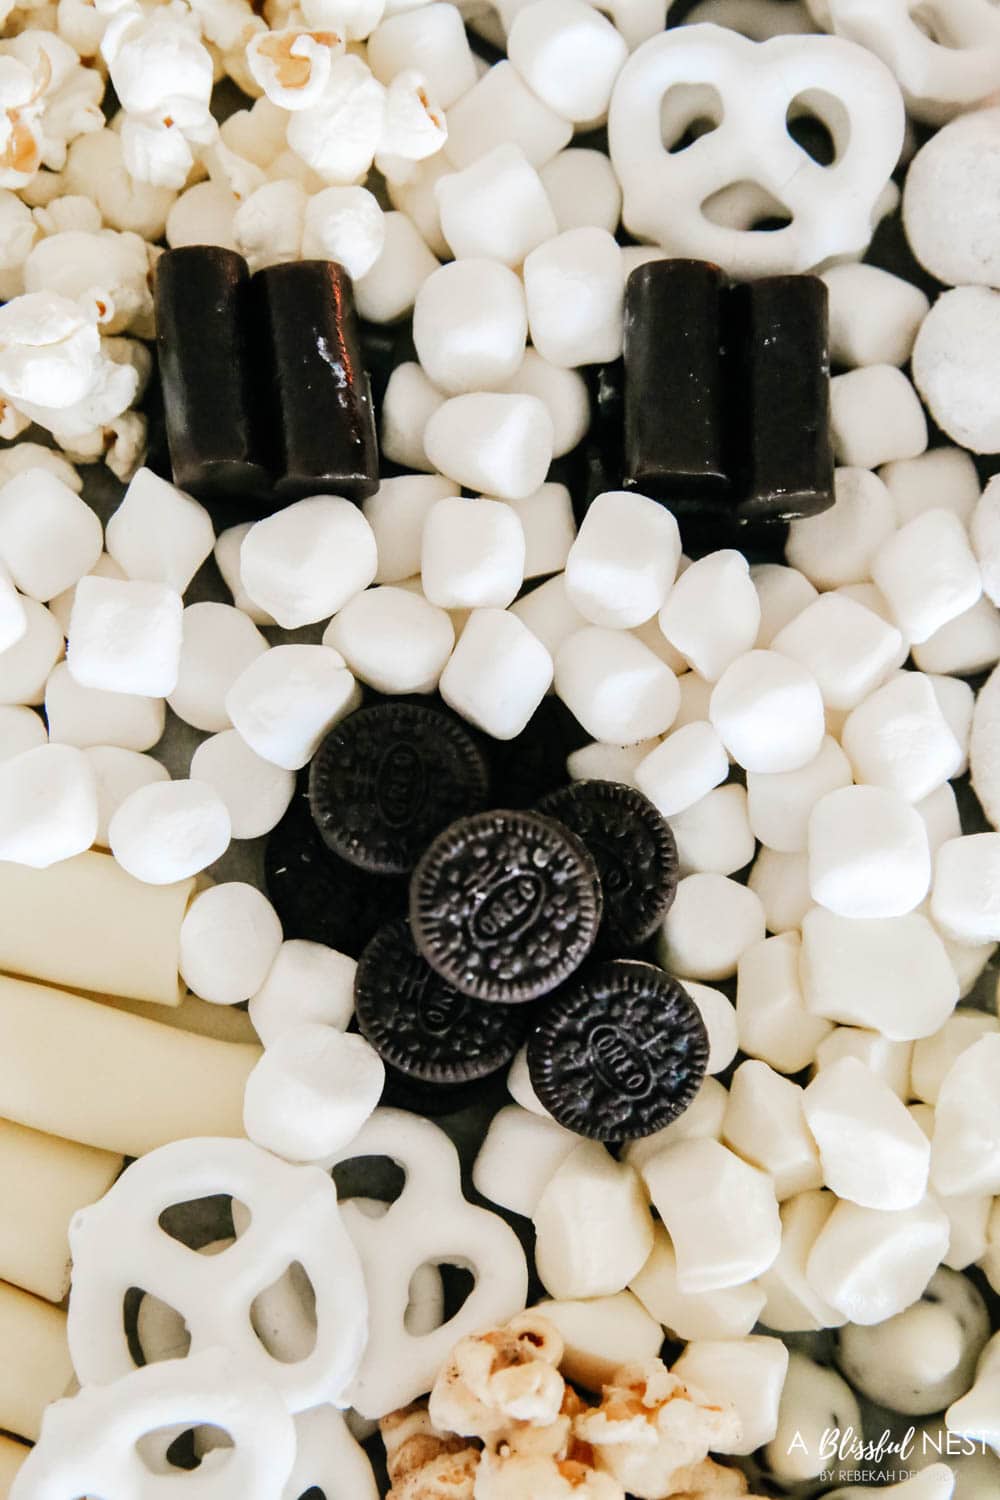 Black licorice and mini oreos used as the mouth of the ghost